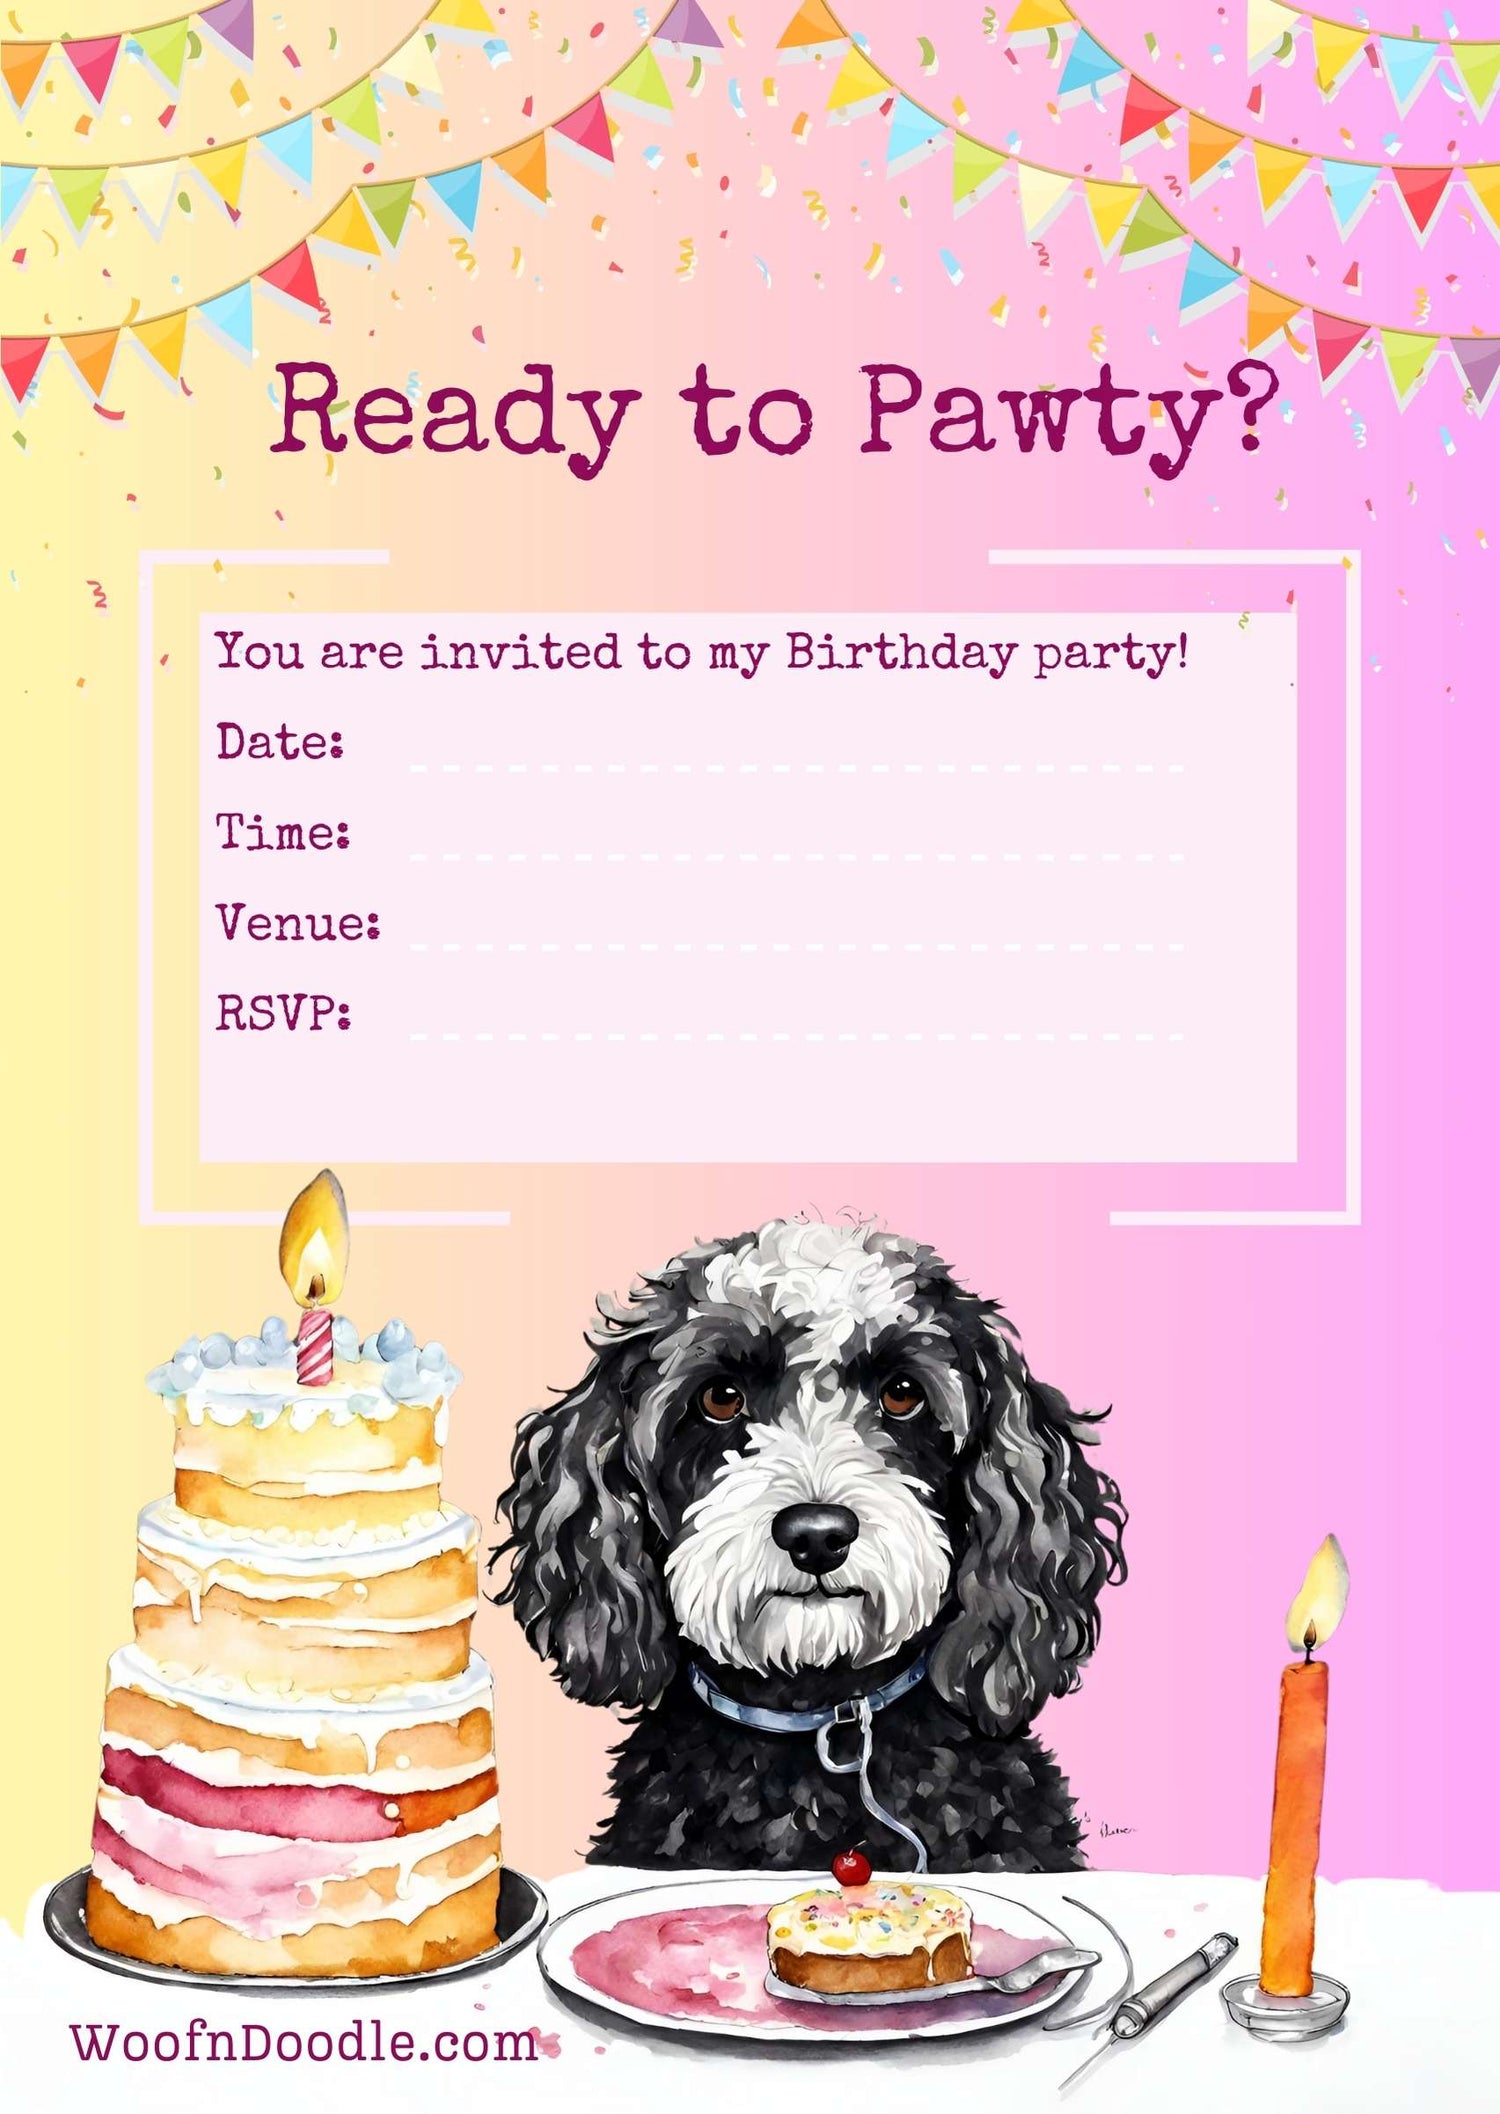 Birthday Party Invite with Dog